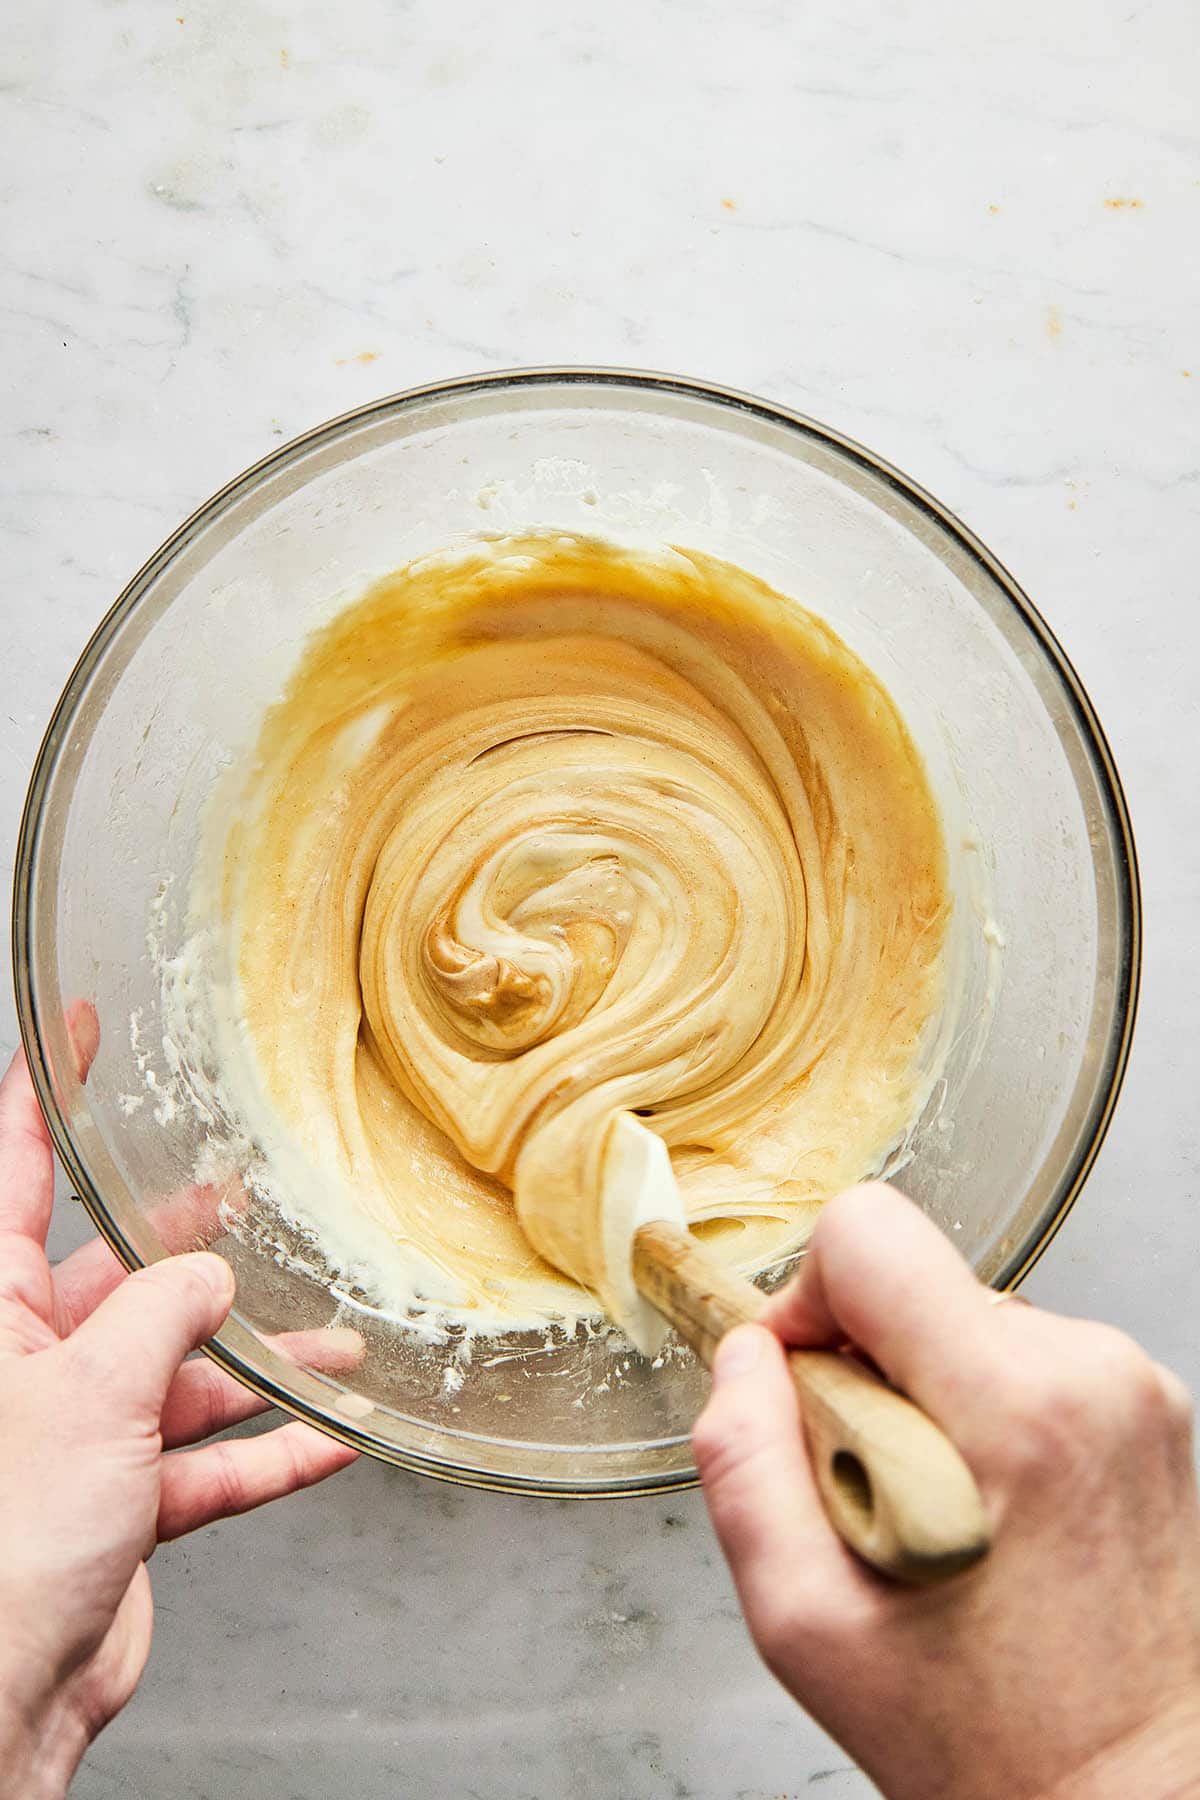 A hand using a rubber spatula to stir melted marshmallow and peanut butter together.